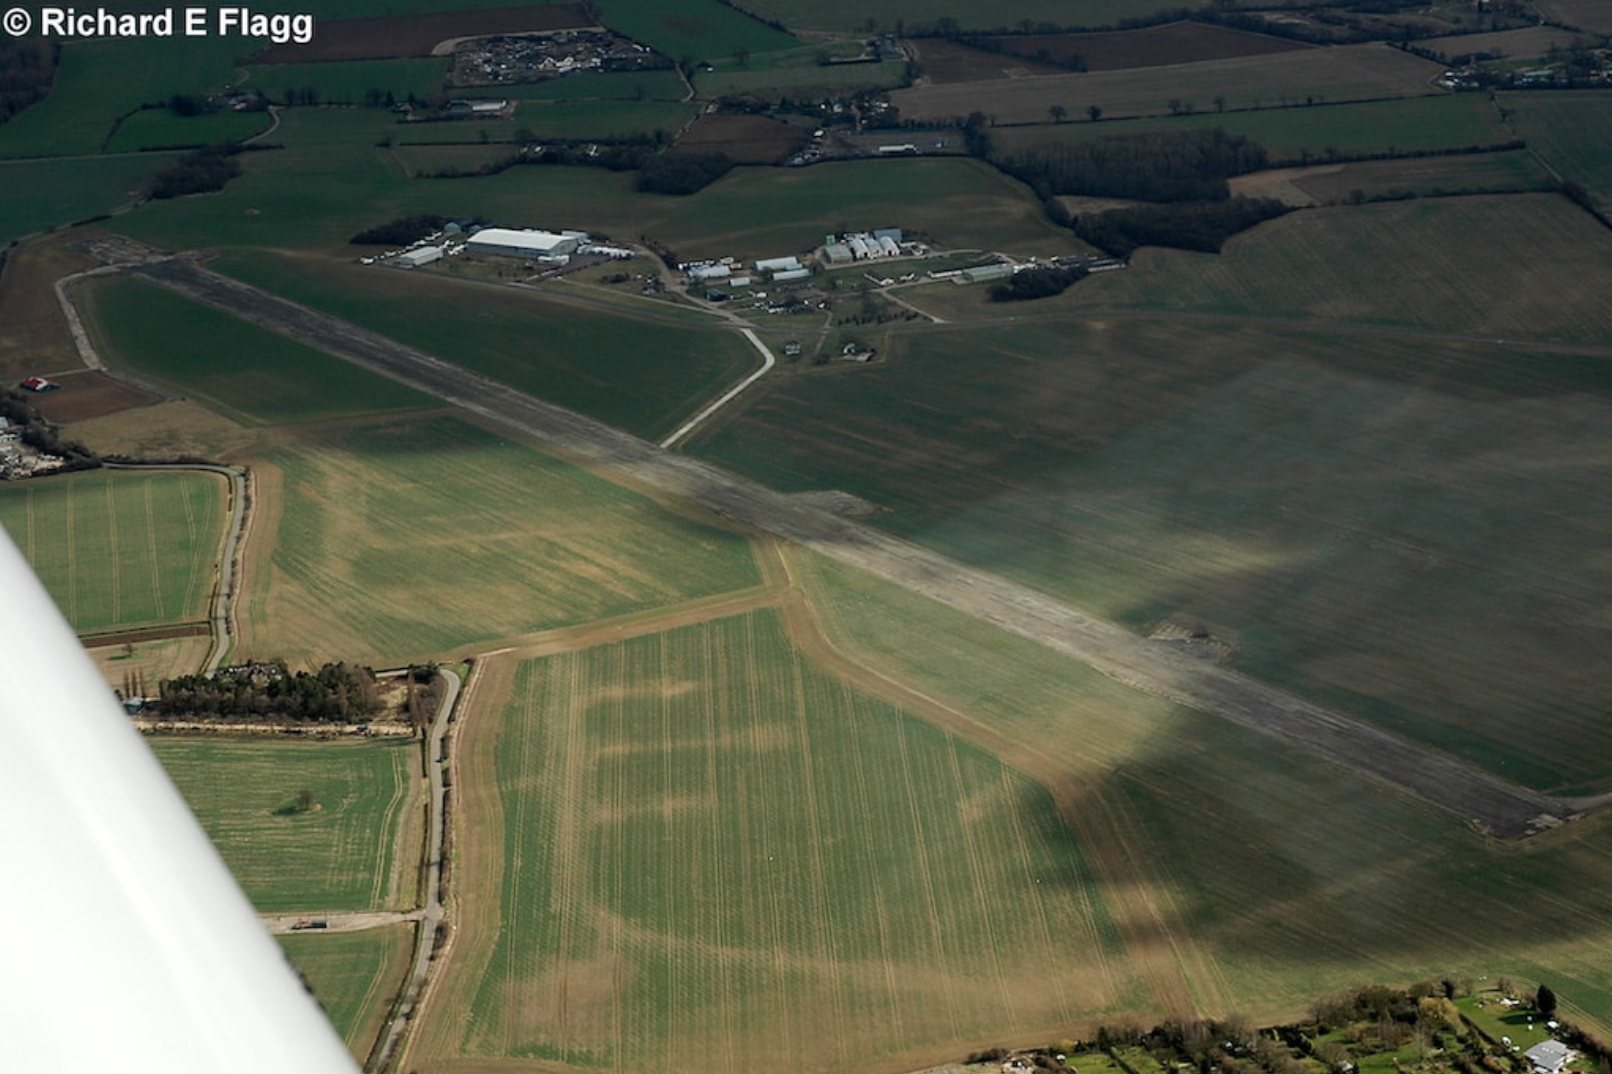 018Aerial View of Little Staughton Airfield - 14 March 2009.png